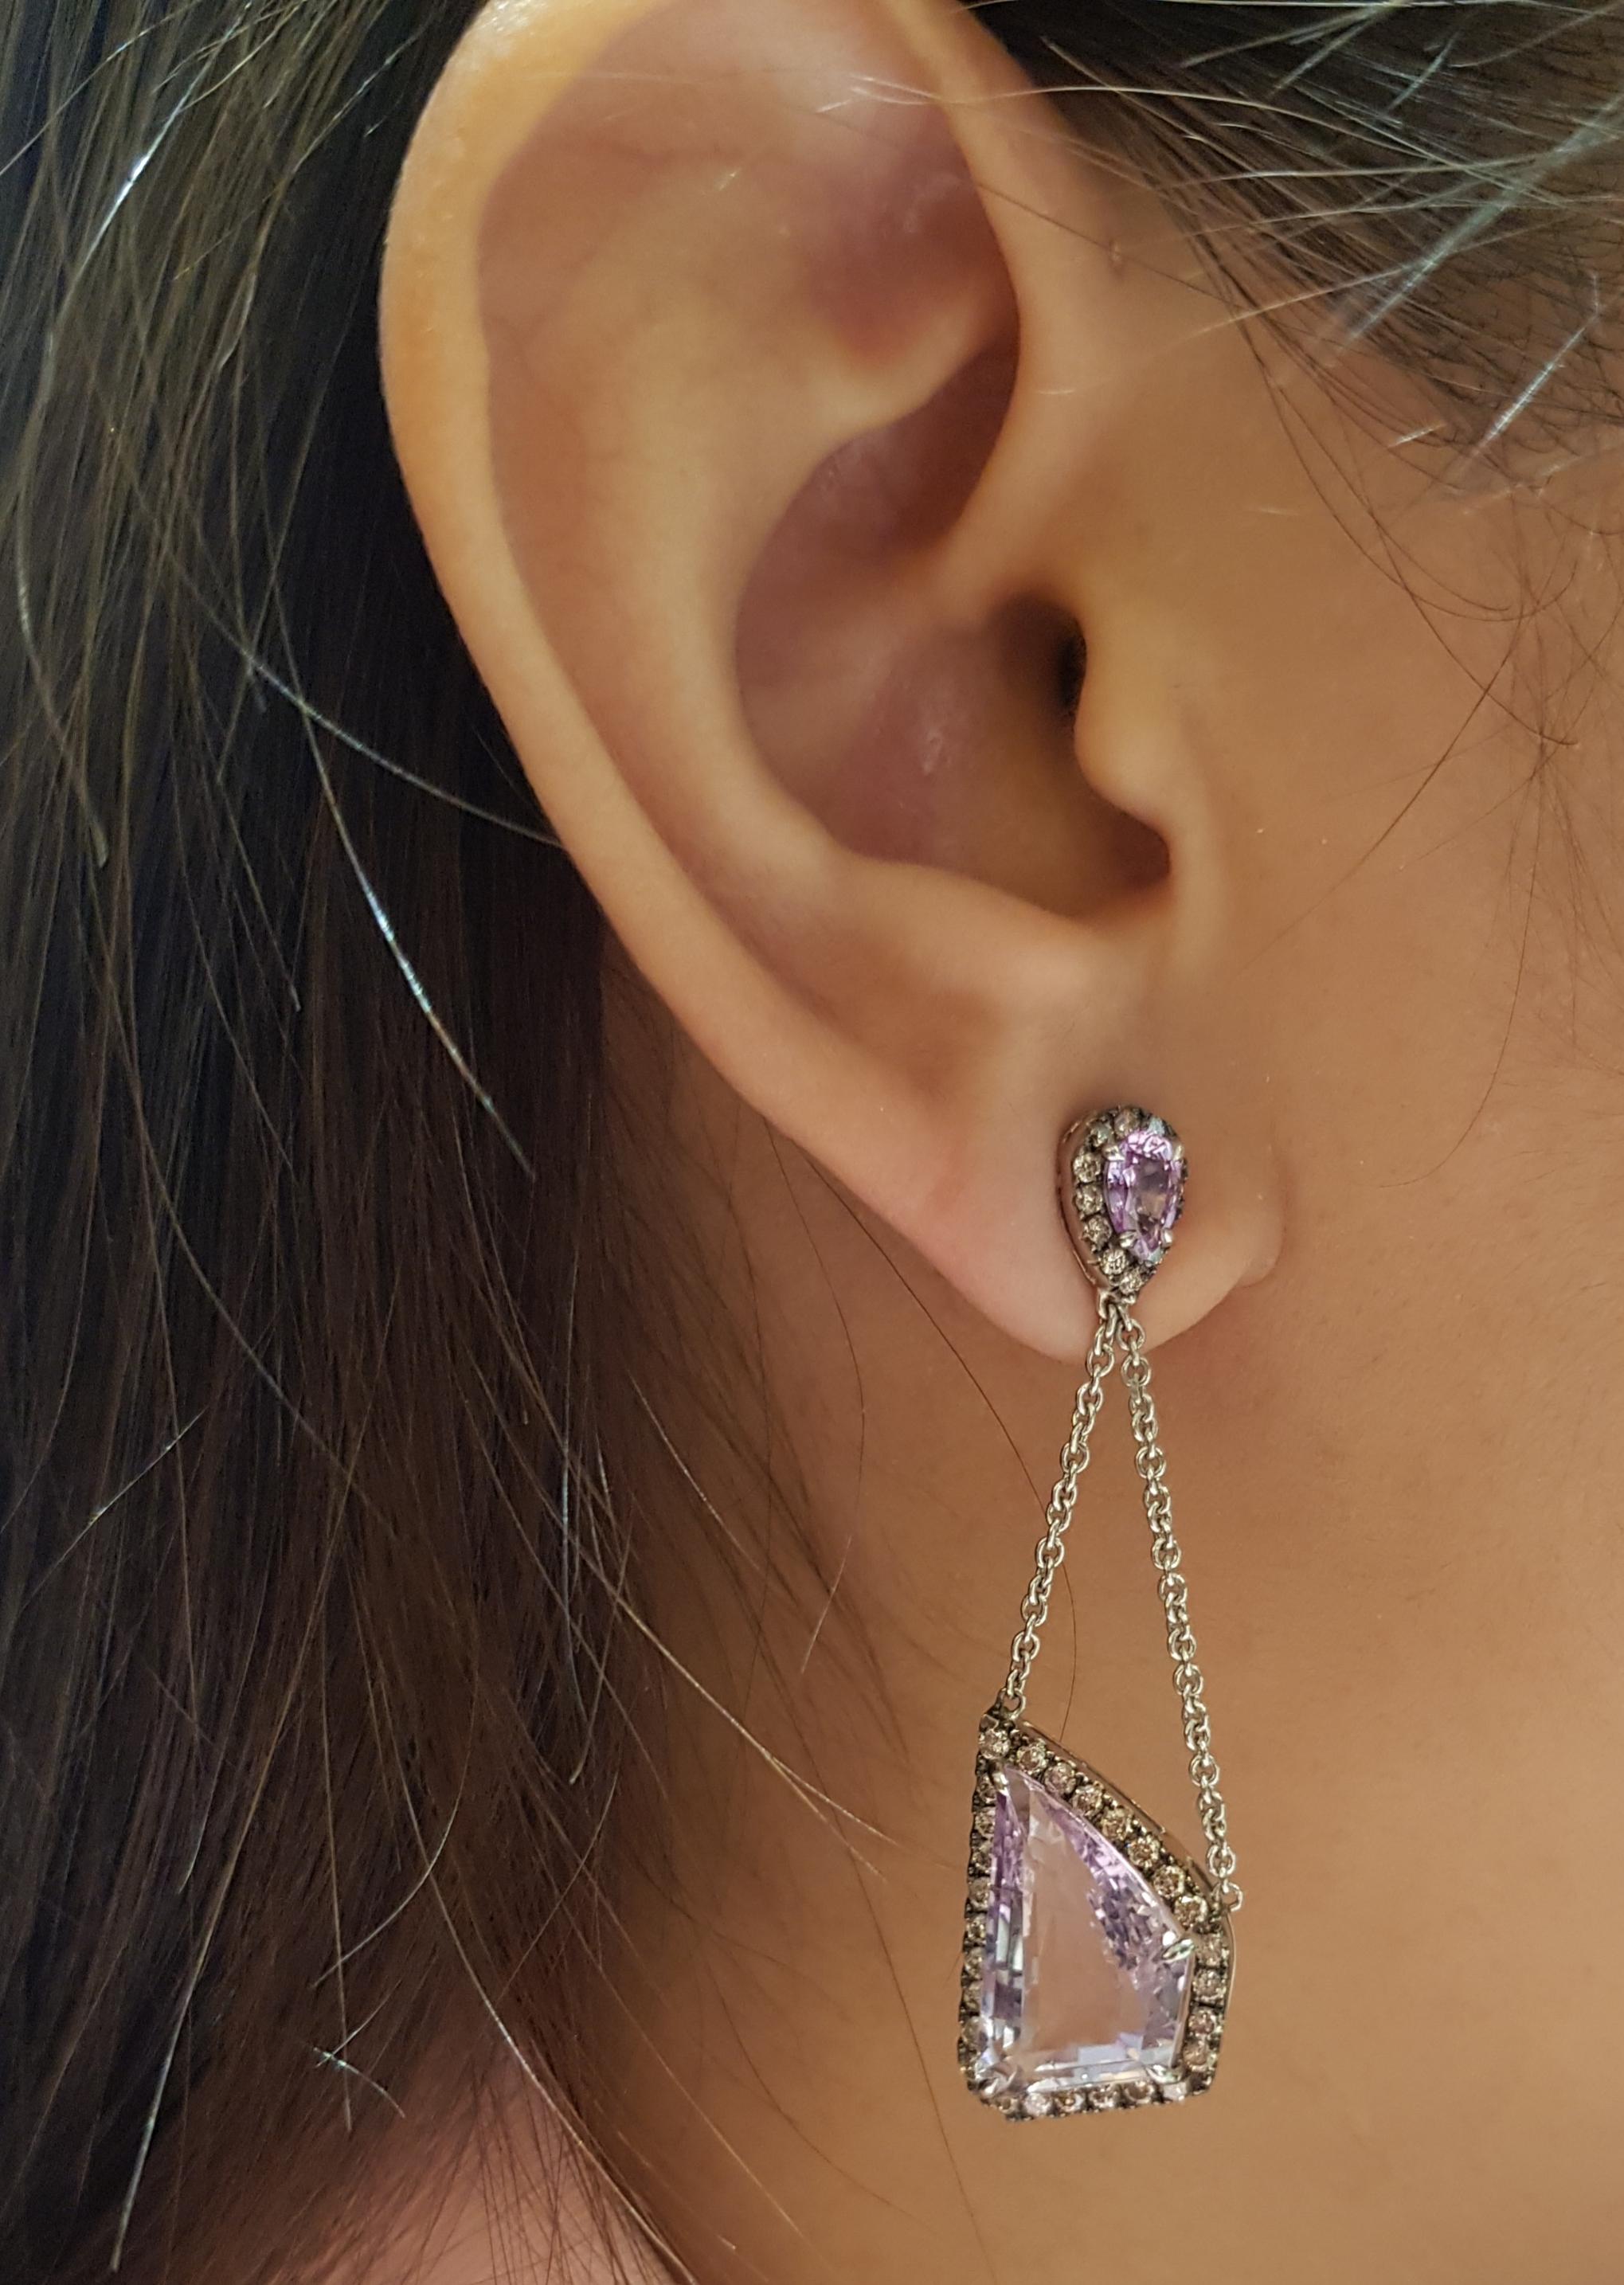 Amethyst 15.47 carats with Pink Sapphire 0.98 carat and Brown Diamond 1.11 cts Earrings set in 18 Karat White Gold Settings

Width:  1.8 cm 
Length:  4.9 cm
Total Weight: 14.0 grams

